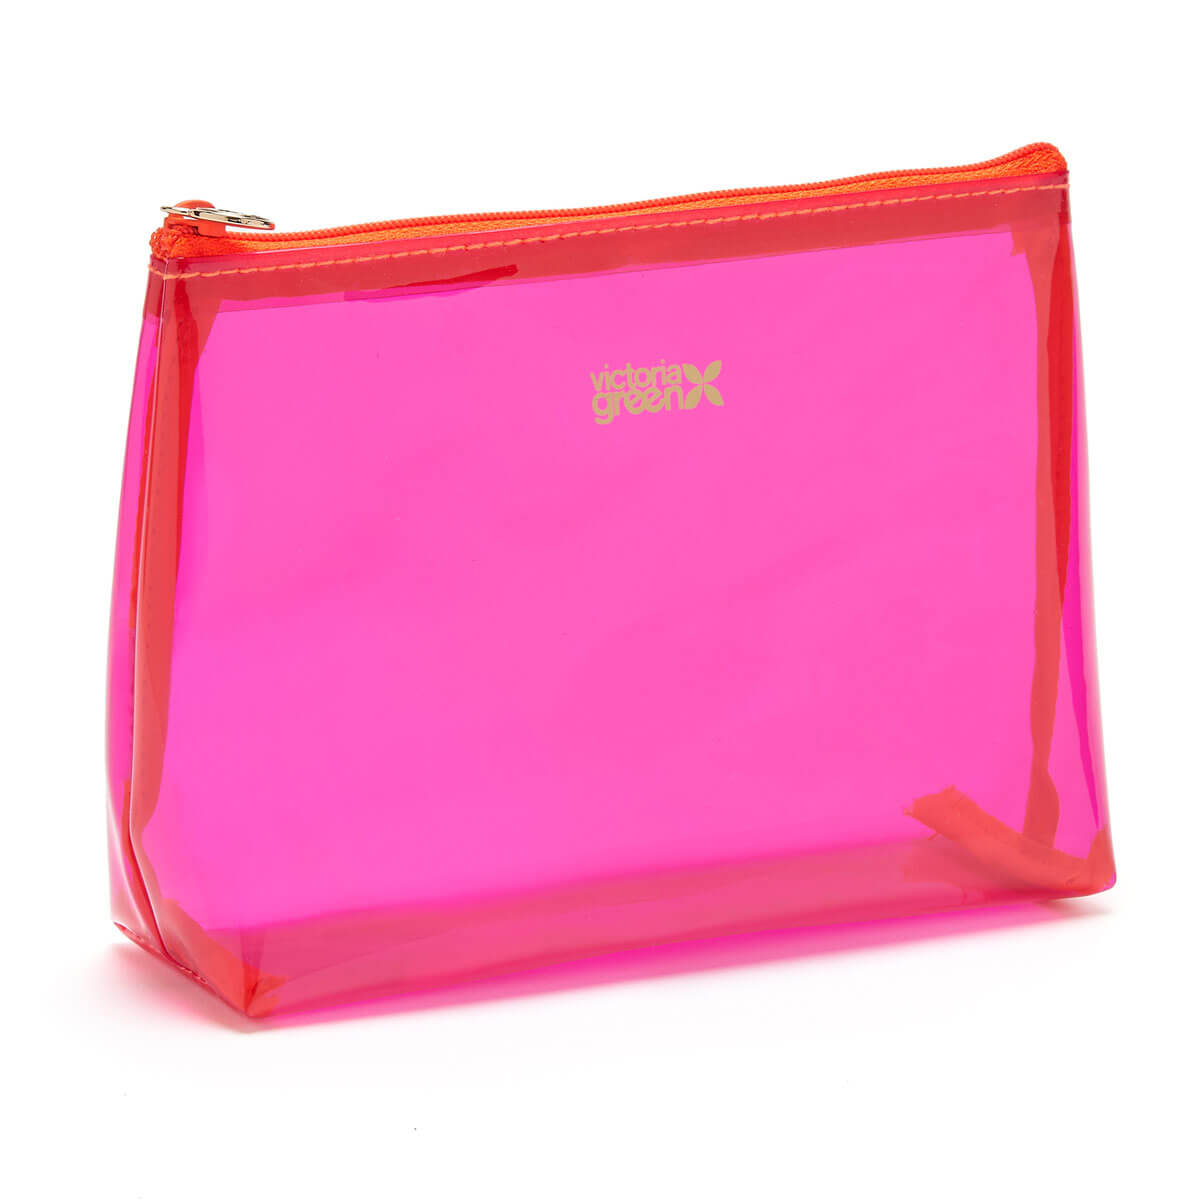 Icon Pink & Green Clear Purse